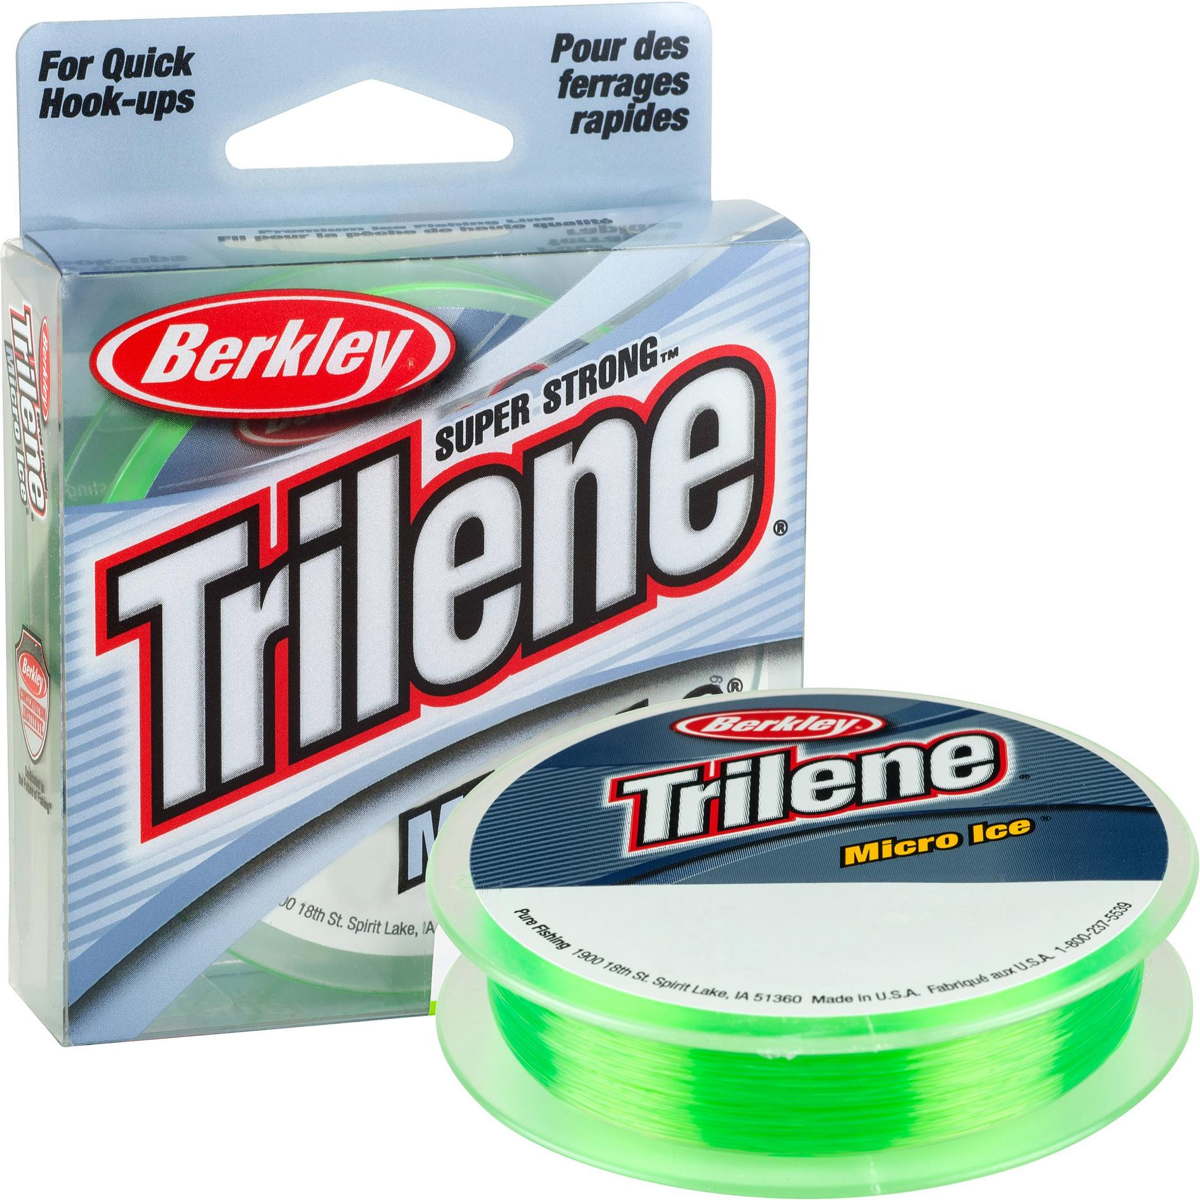 Photo of Berkley Trilene Micro Ice for sale at United Tackle Shops.